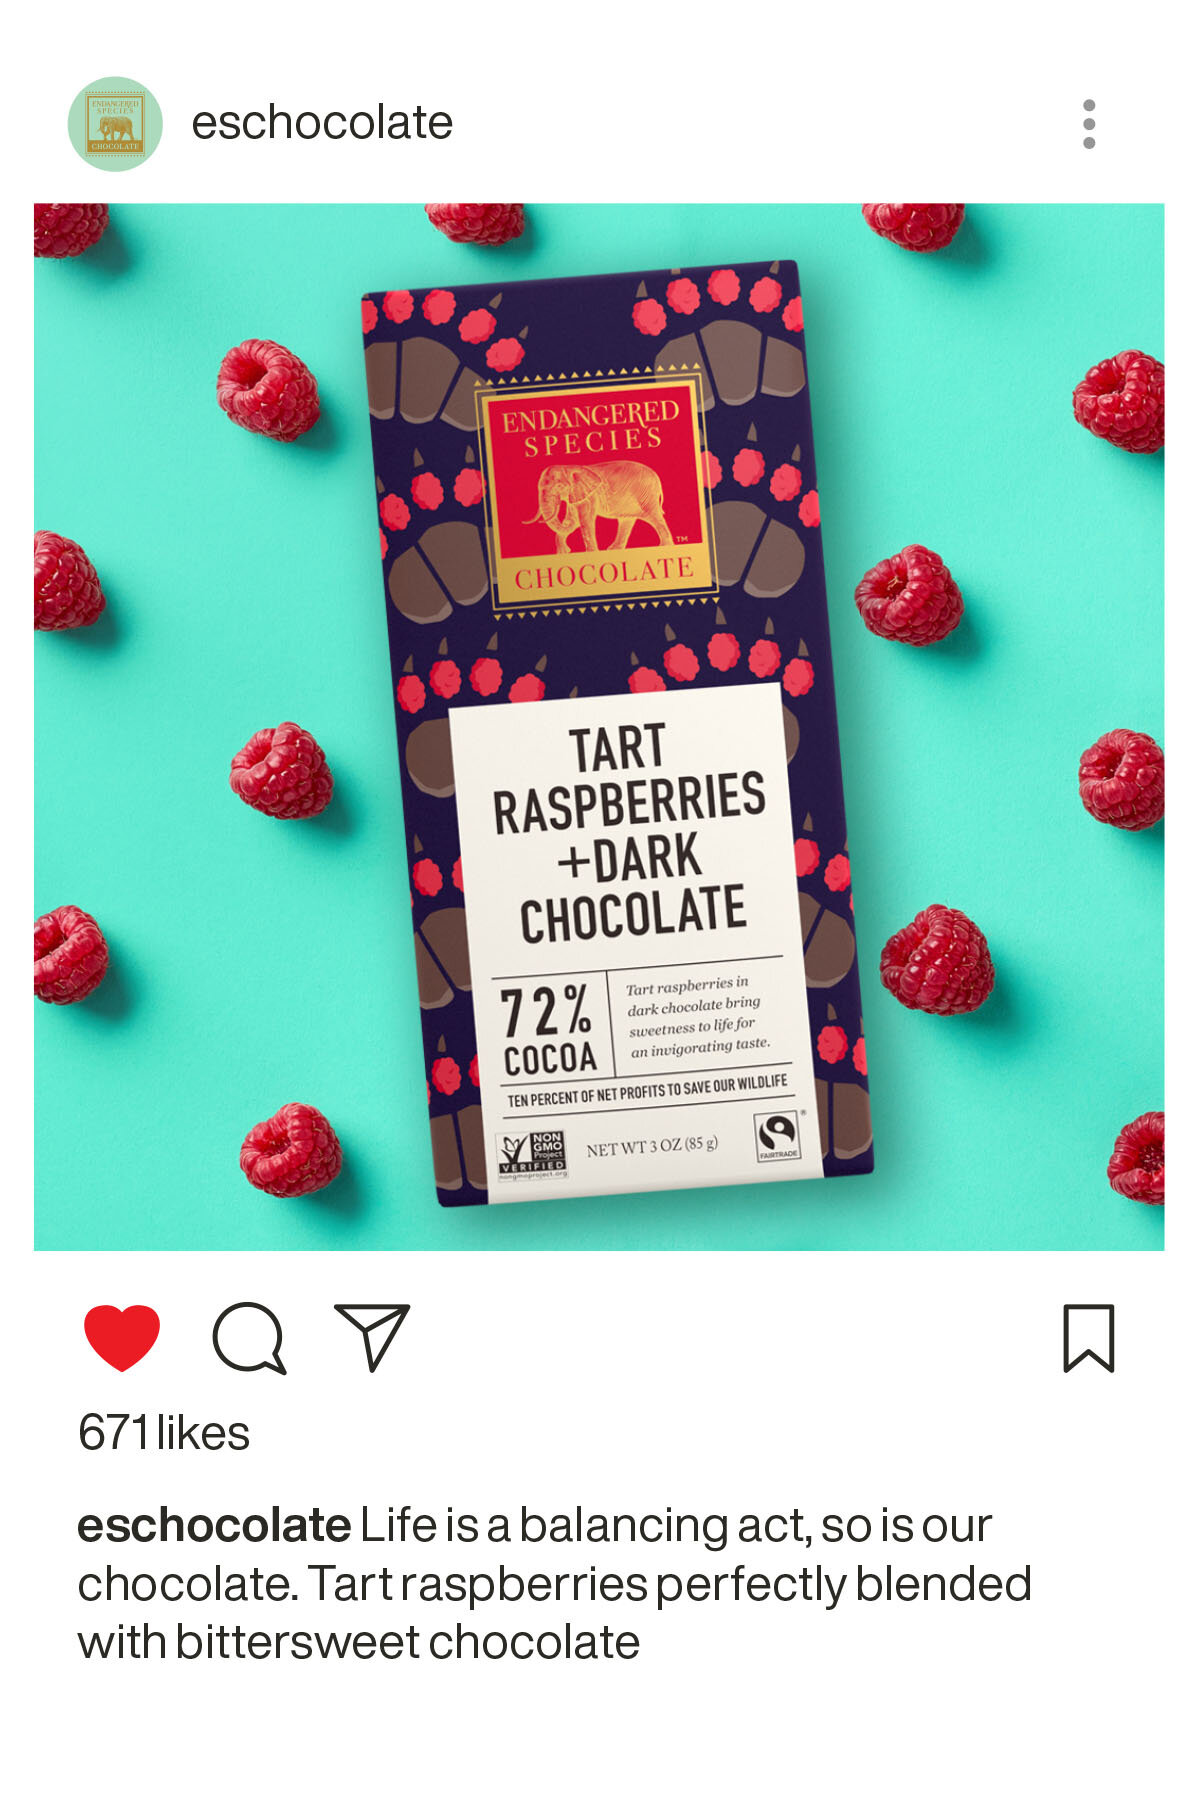 Instagram post of a 3D render of the redesigned 3oz dark chocolate Grizzly bar surrounded by raspberries on a teal background